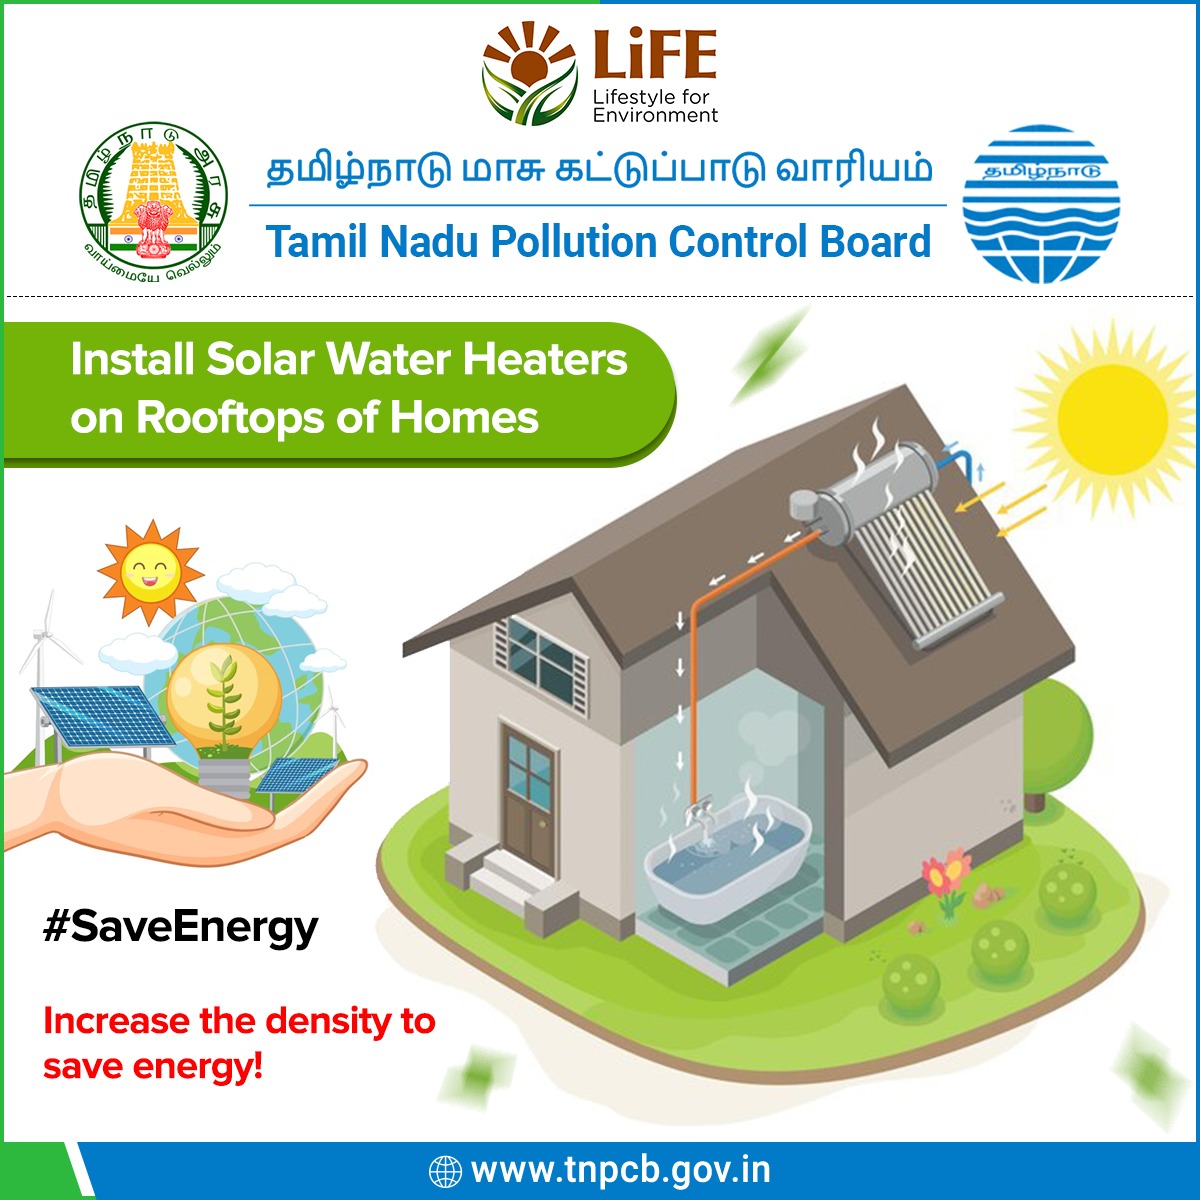 Harness the Power of the Sun!

Install Solar Water heaters on your rooftop to elevate energy efficiency. Let's collectively boost the density of solar solutions and take significant step towards sustainable future
 #TNPCB #PollutionControl #Ecotips #ProtectEnvironment #SaveEnergy